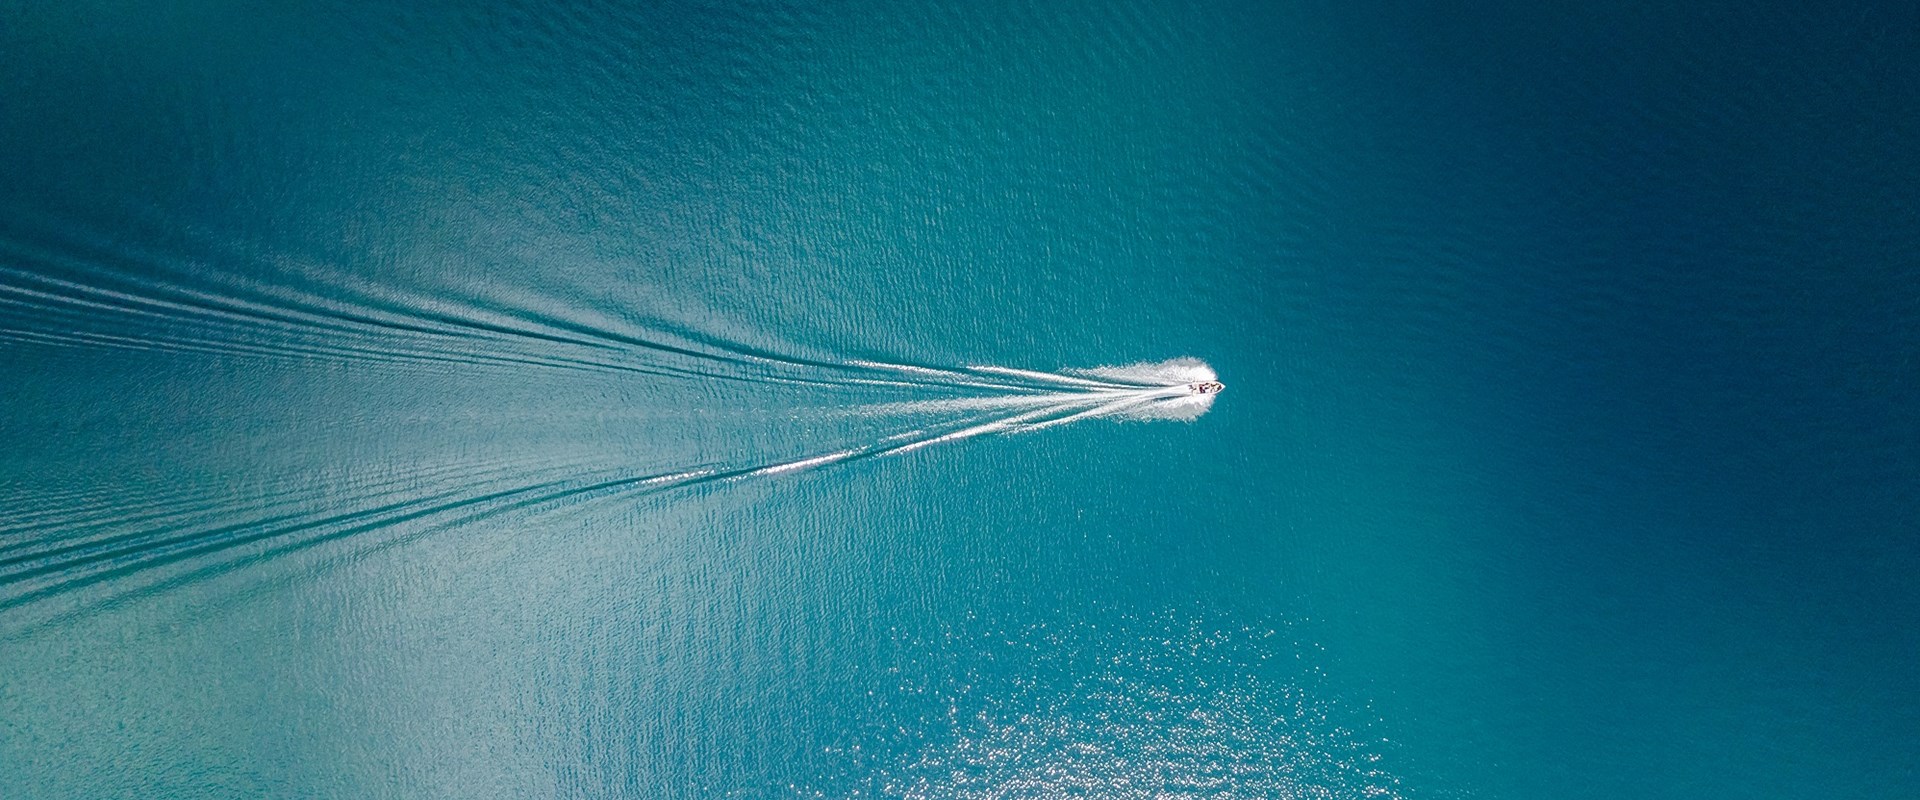 Aerial image of a ship in the water